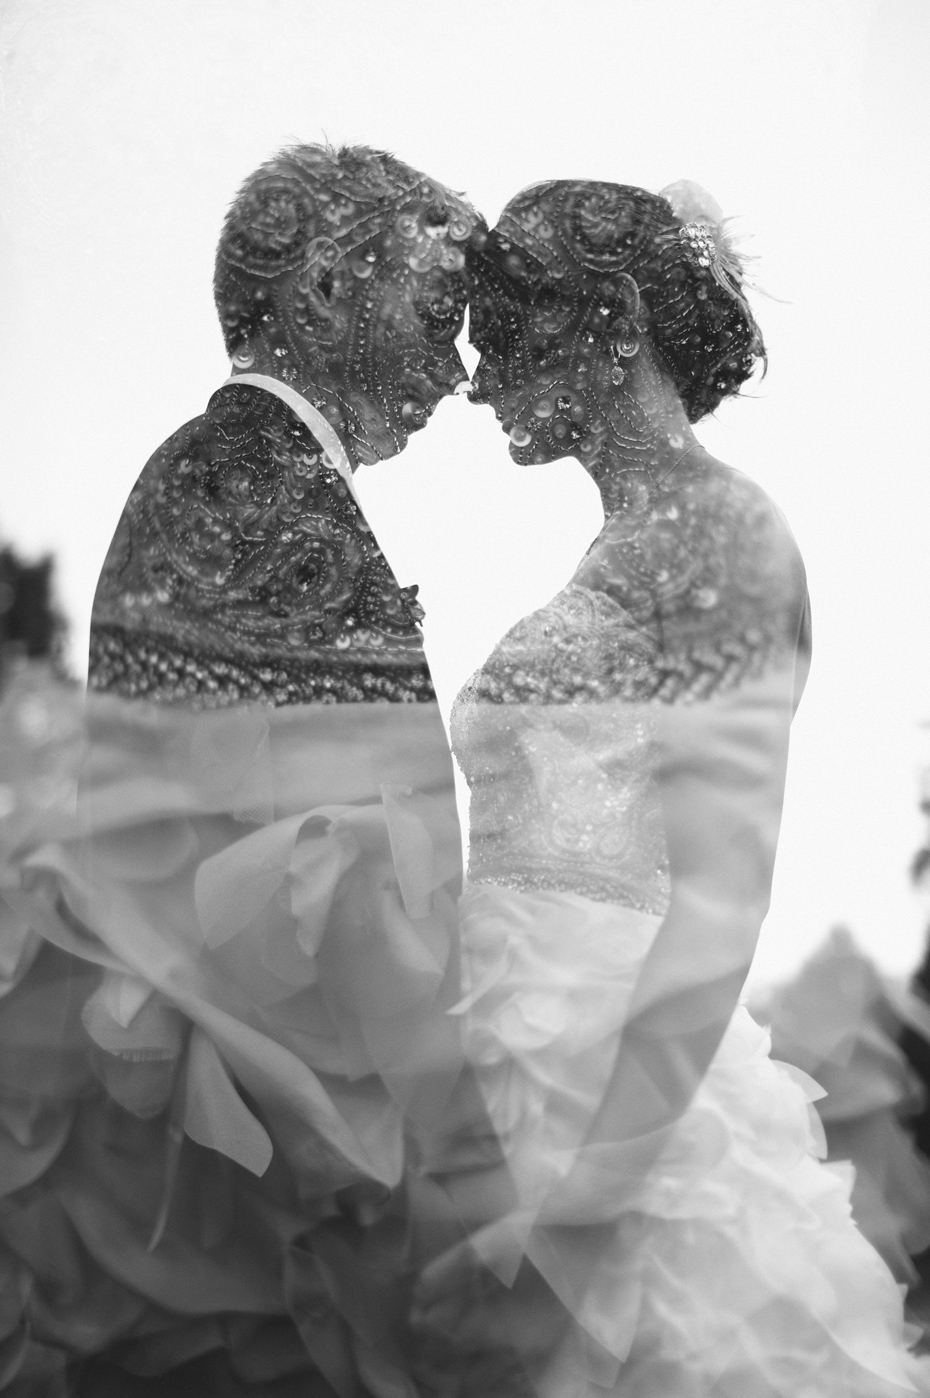 A double exposure at the Detroit Zoo in Royal Oak, photographed by Ann Arbor wedding photographer, Heather Jowett.